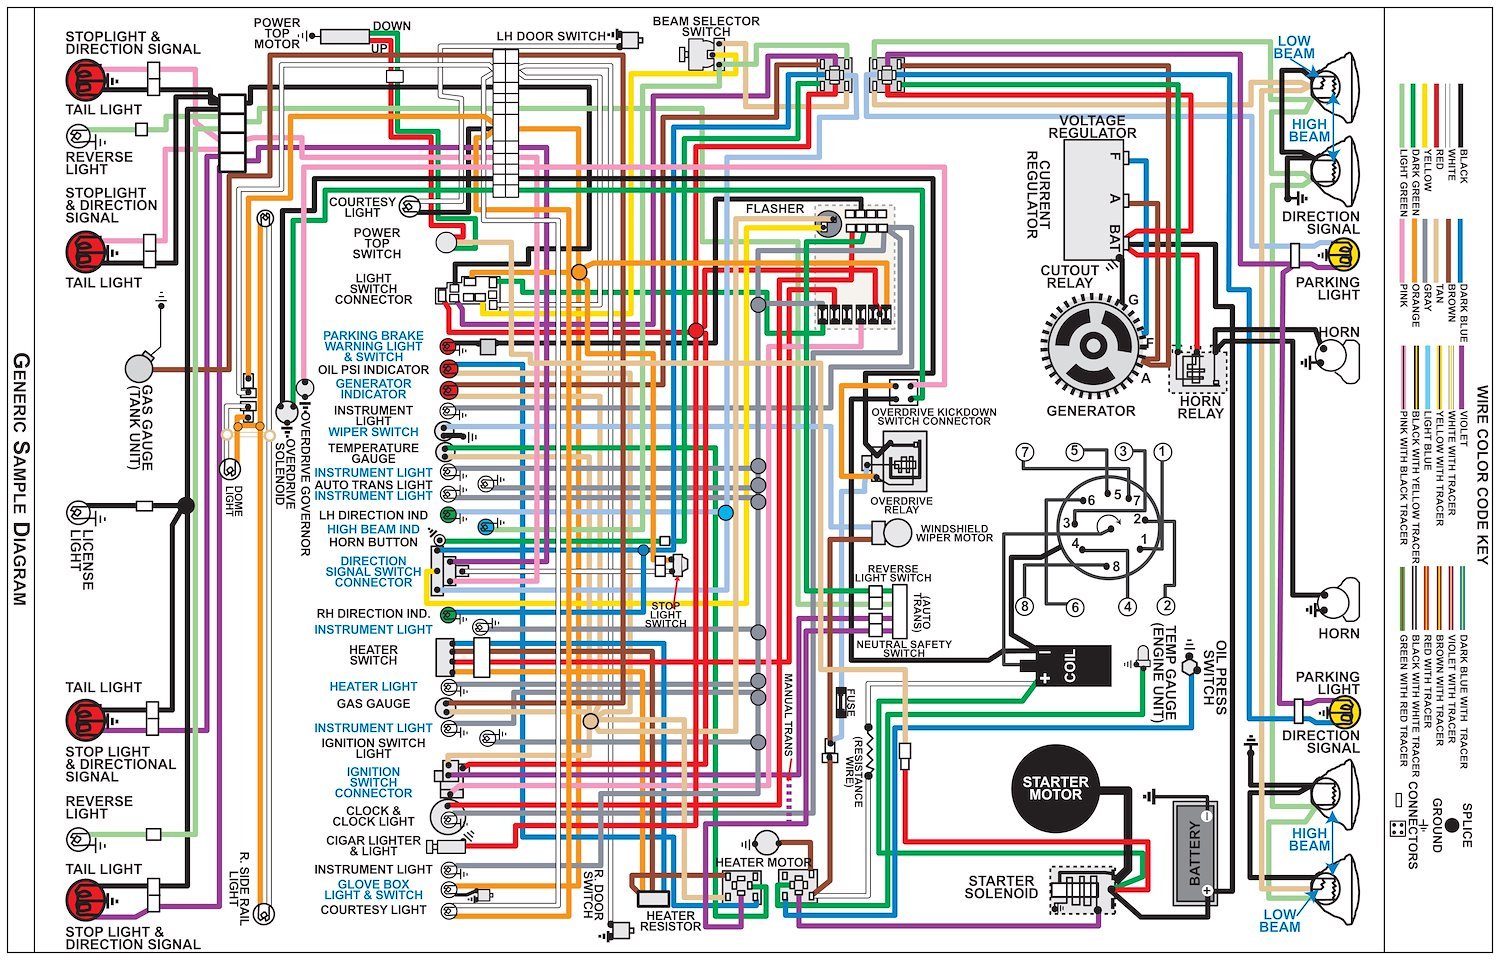 Wiring Diagram for 1966 Ford Mustang, 11 in x 17 in., Laminated